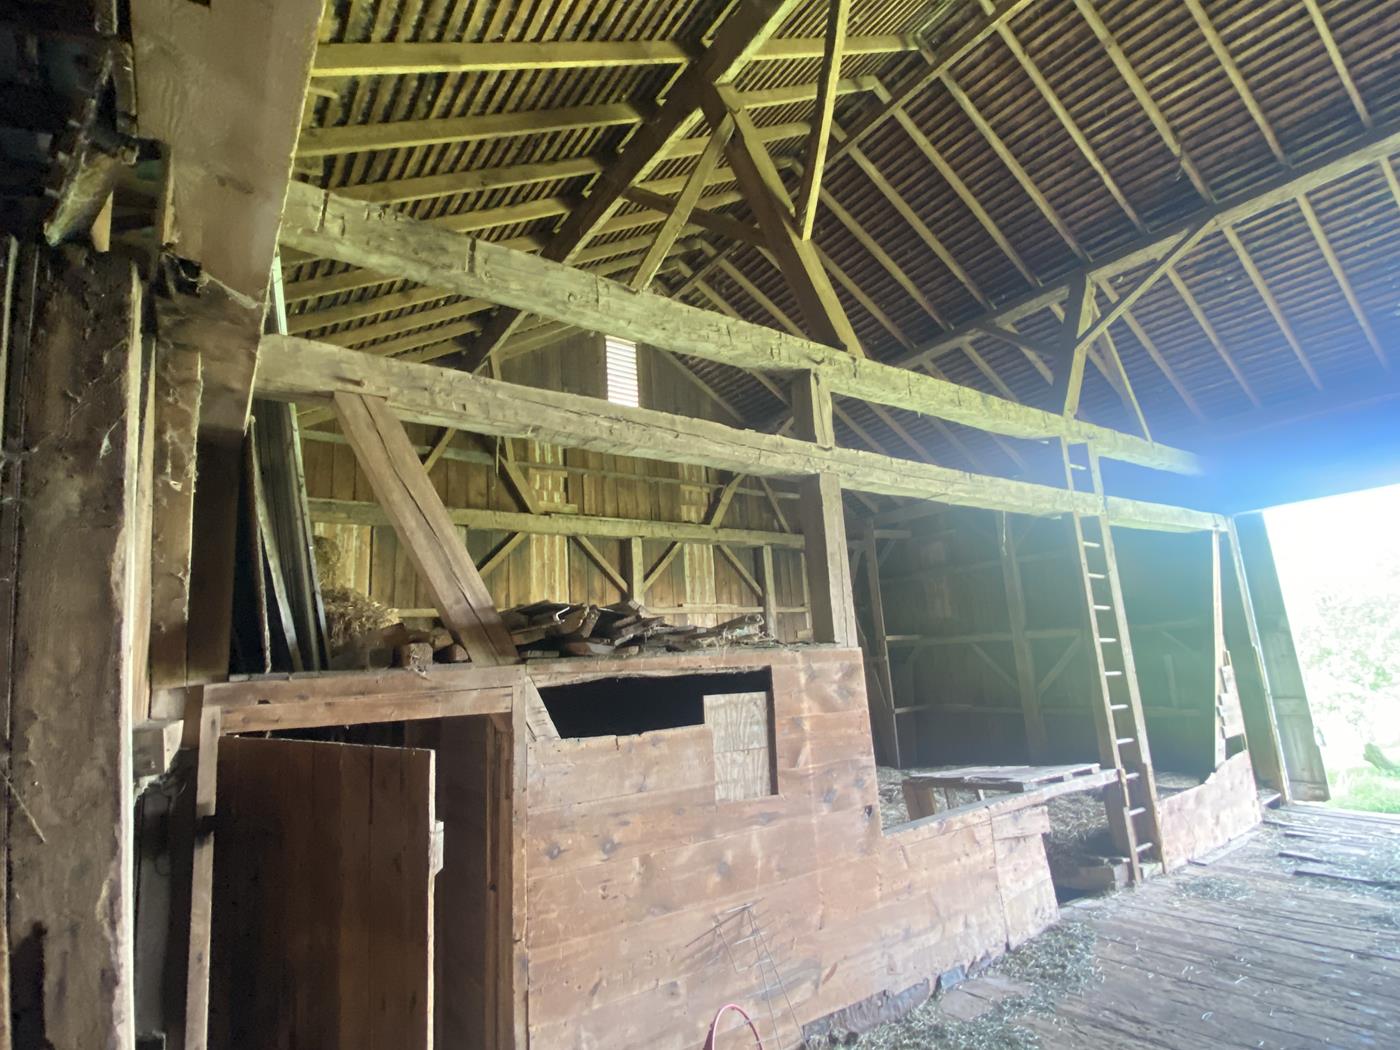 https://www.ohiovalleybarnsalvage.com/images/Marlatt Historic Ohio Barn Frame For Sale - Your Source For Hand-Hewn Two-Sided Sleepers